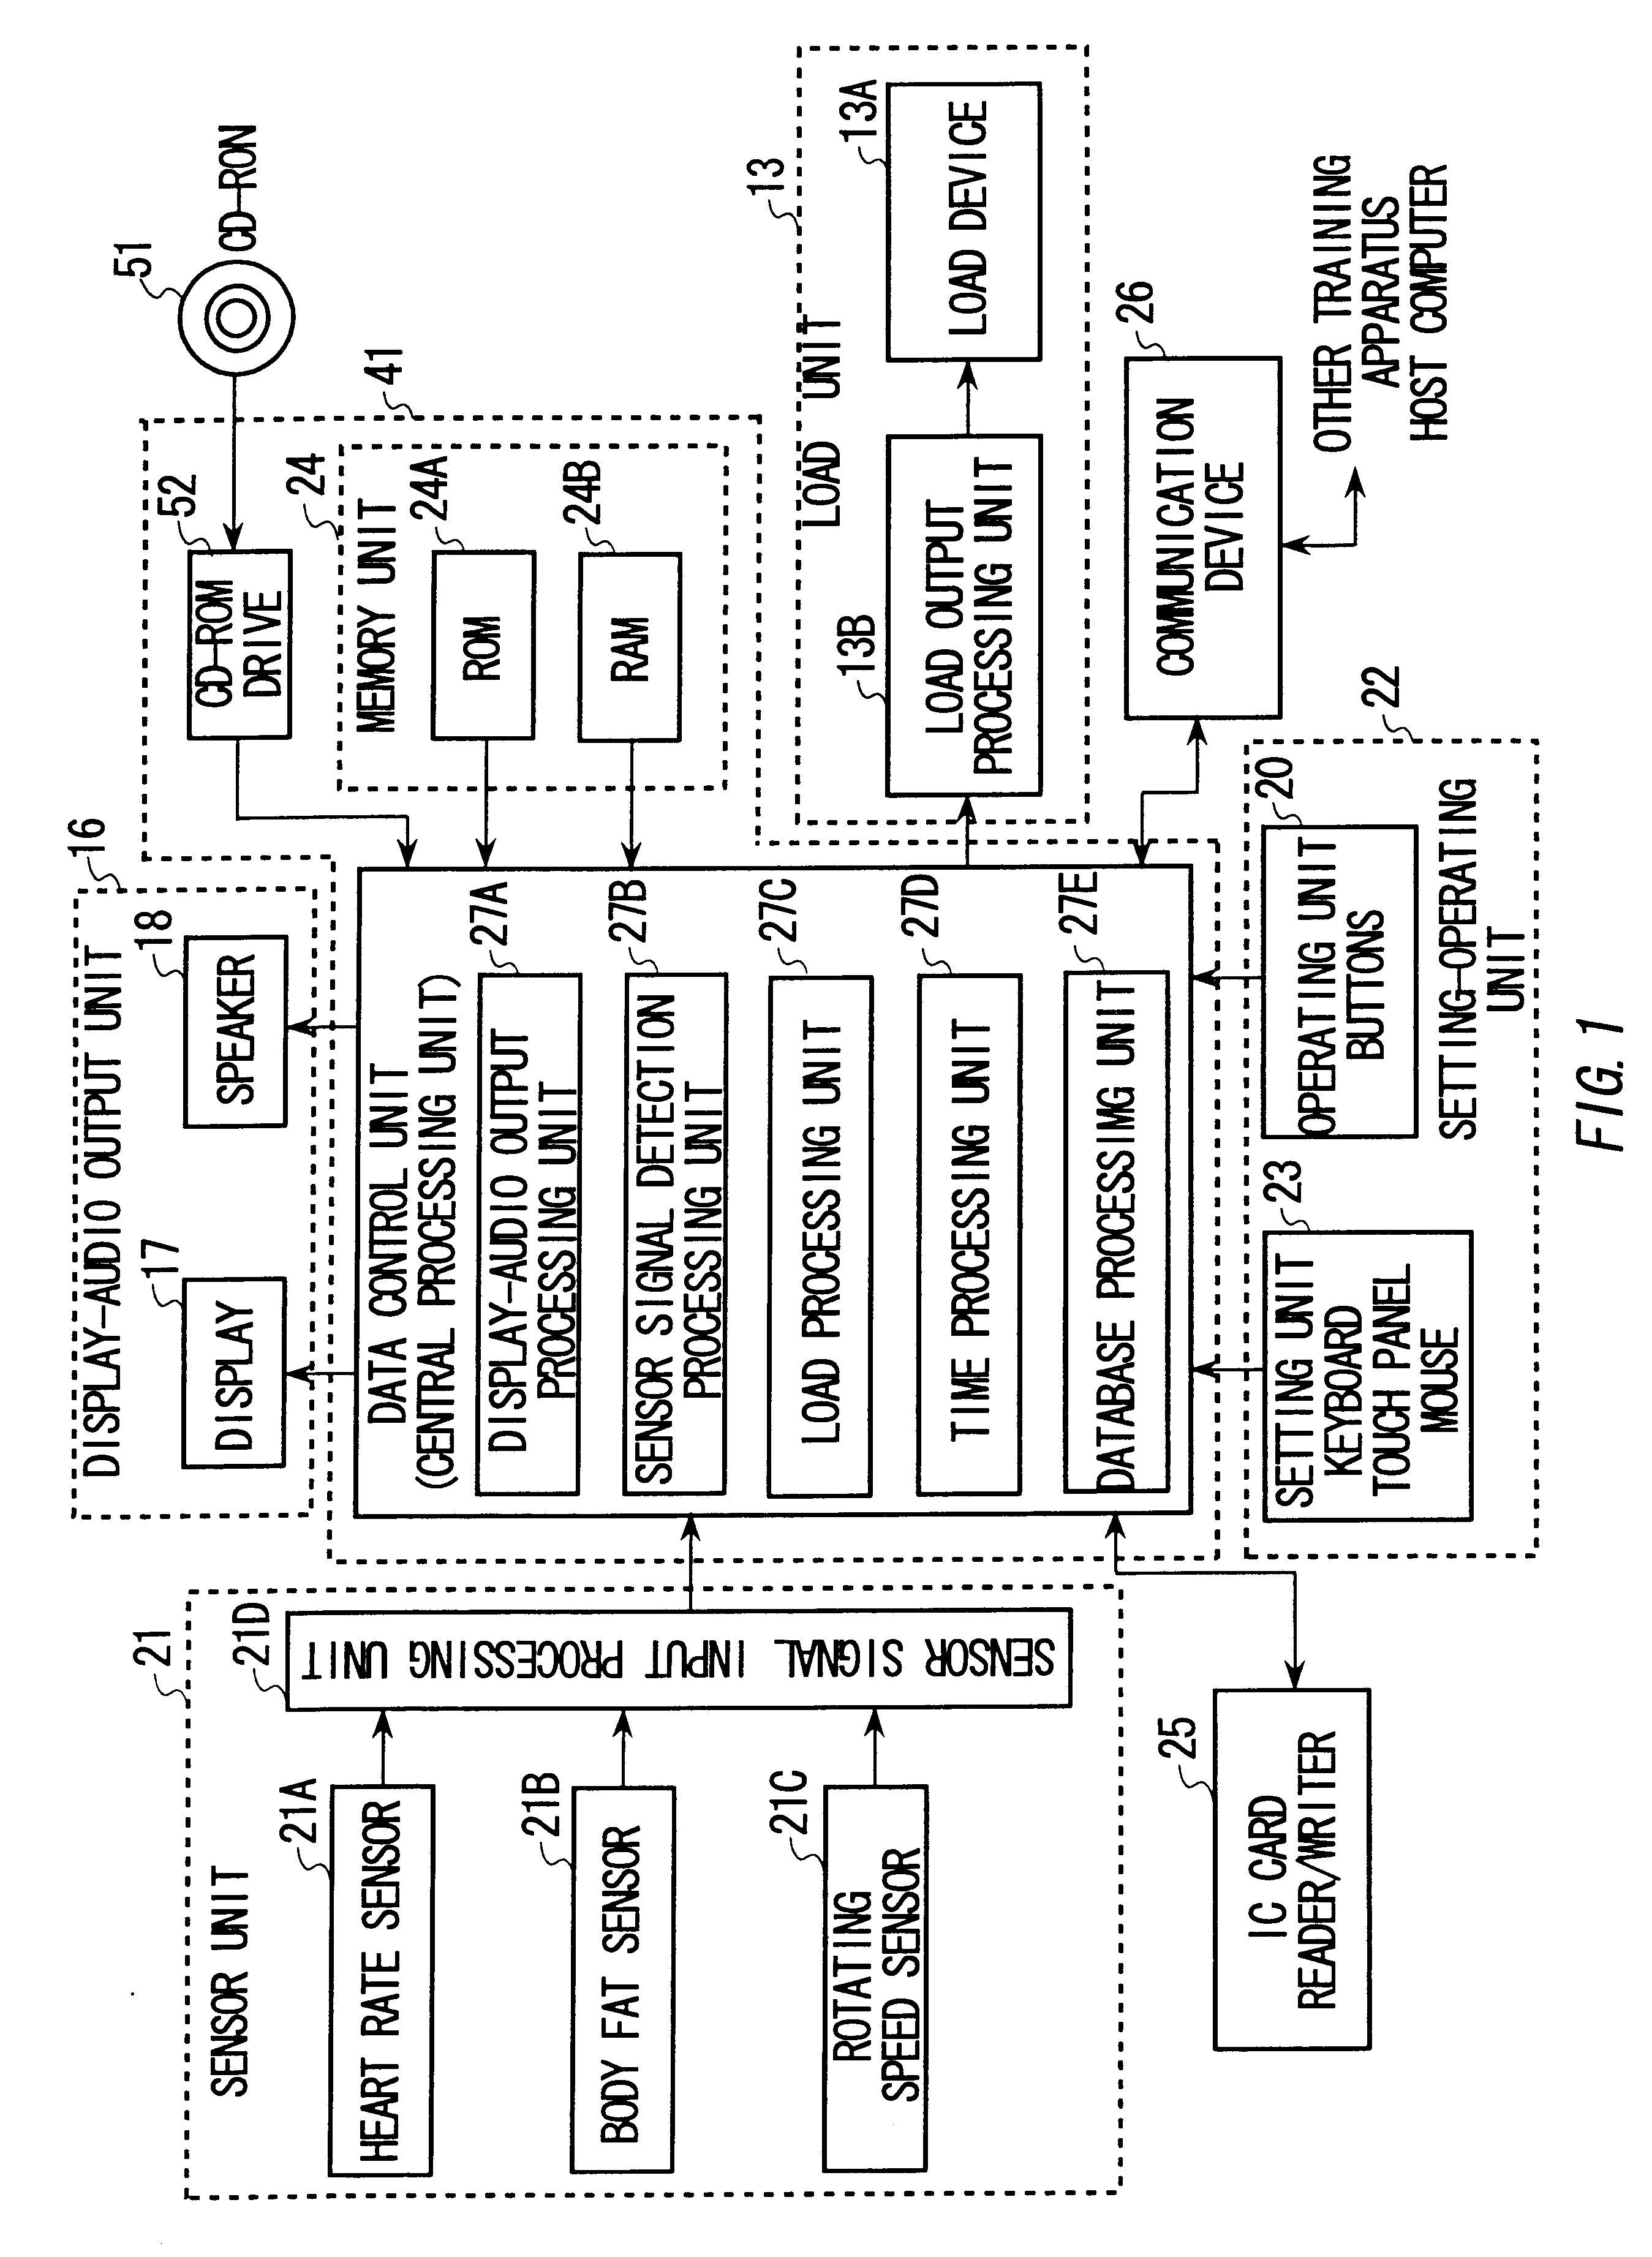 Training machine, image output processing device and method, and recording medium which stores image outputting programs